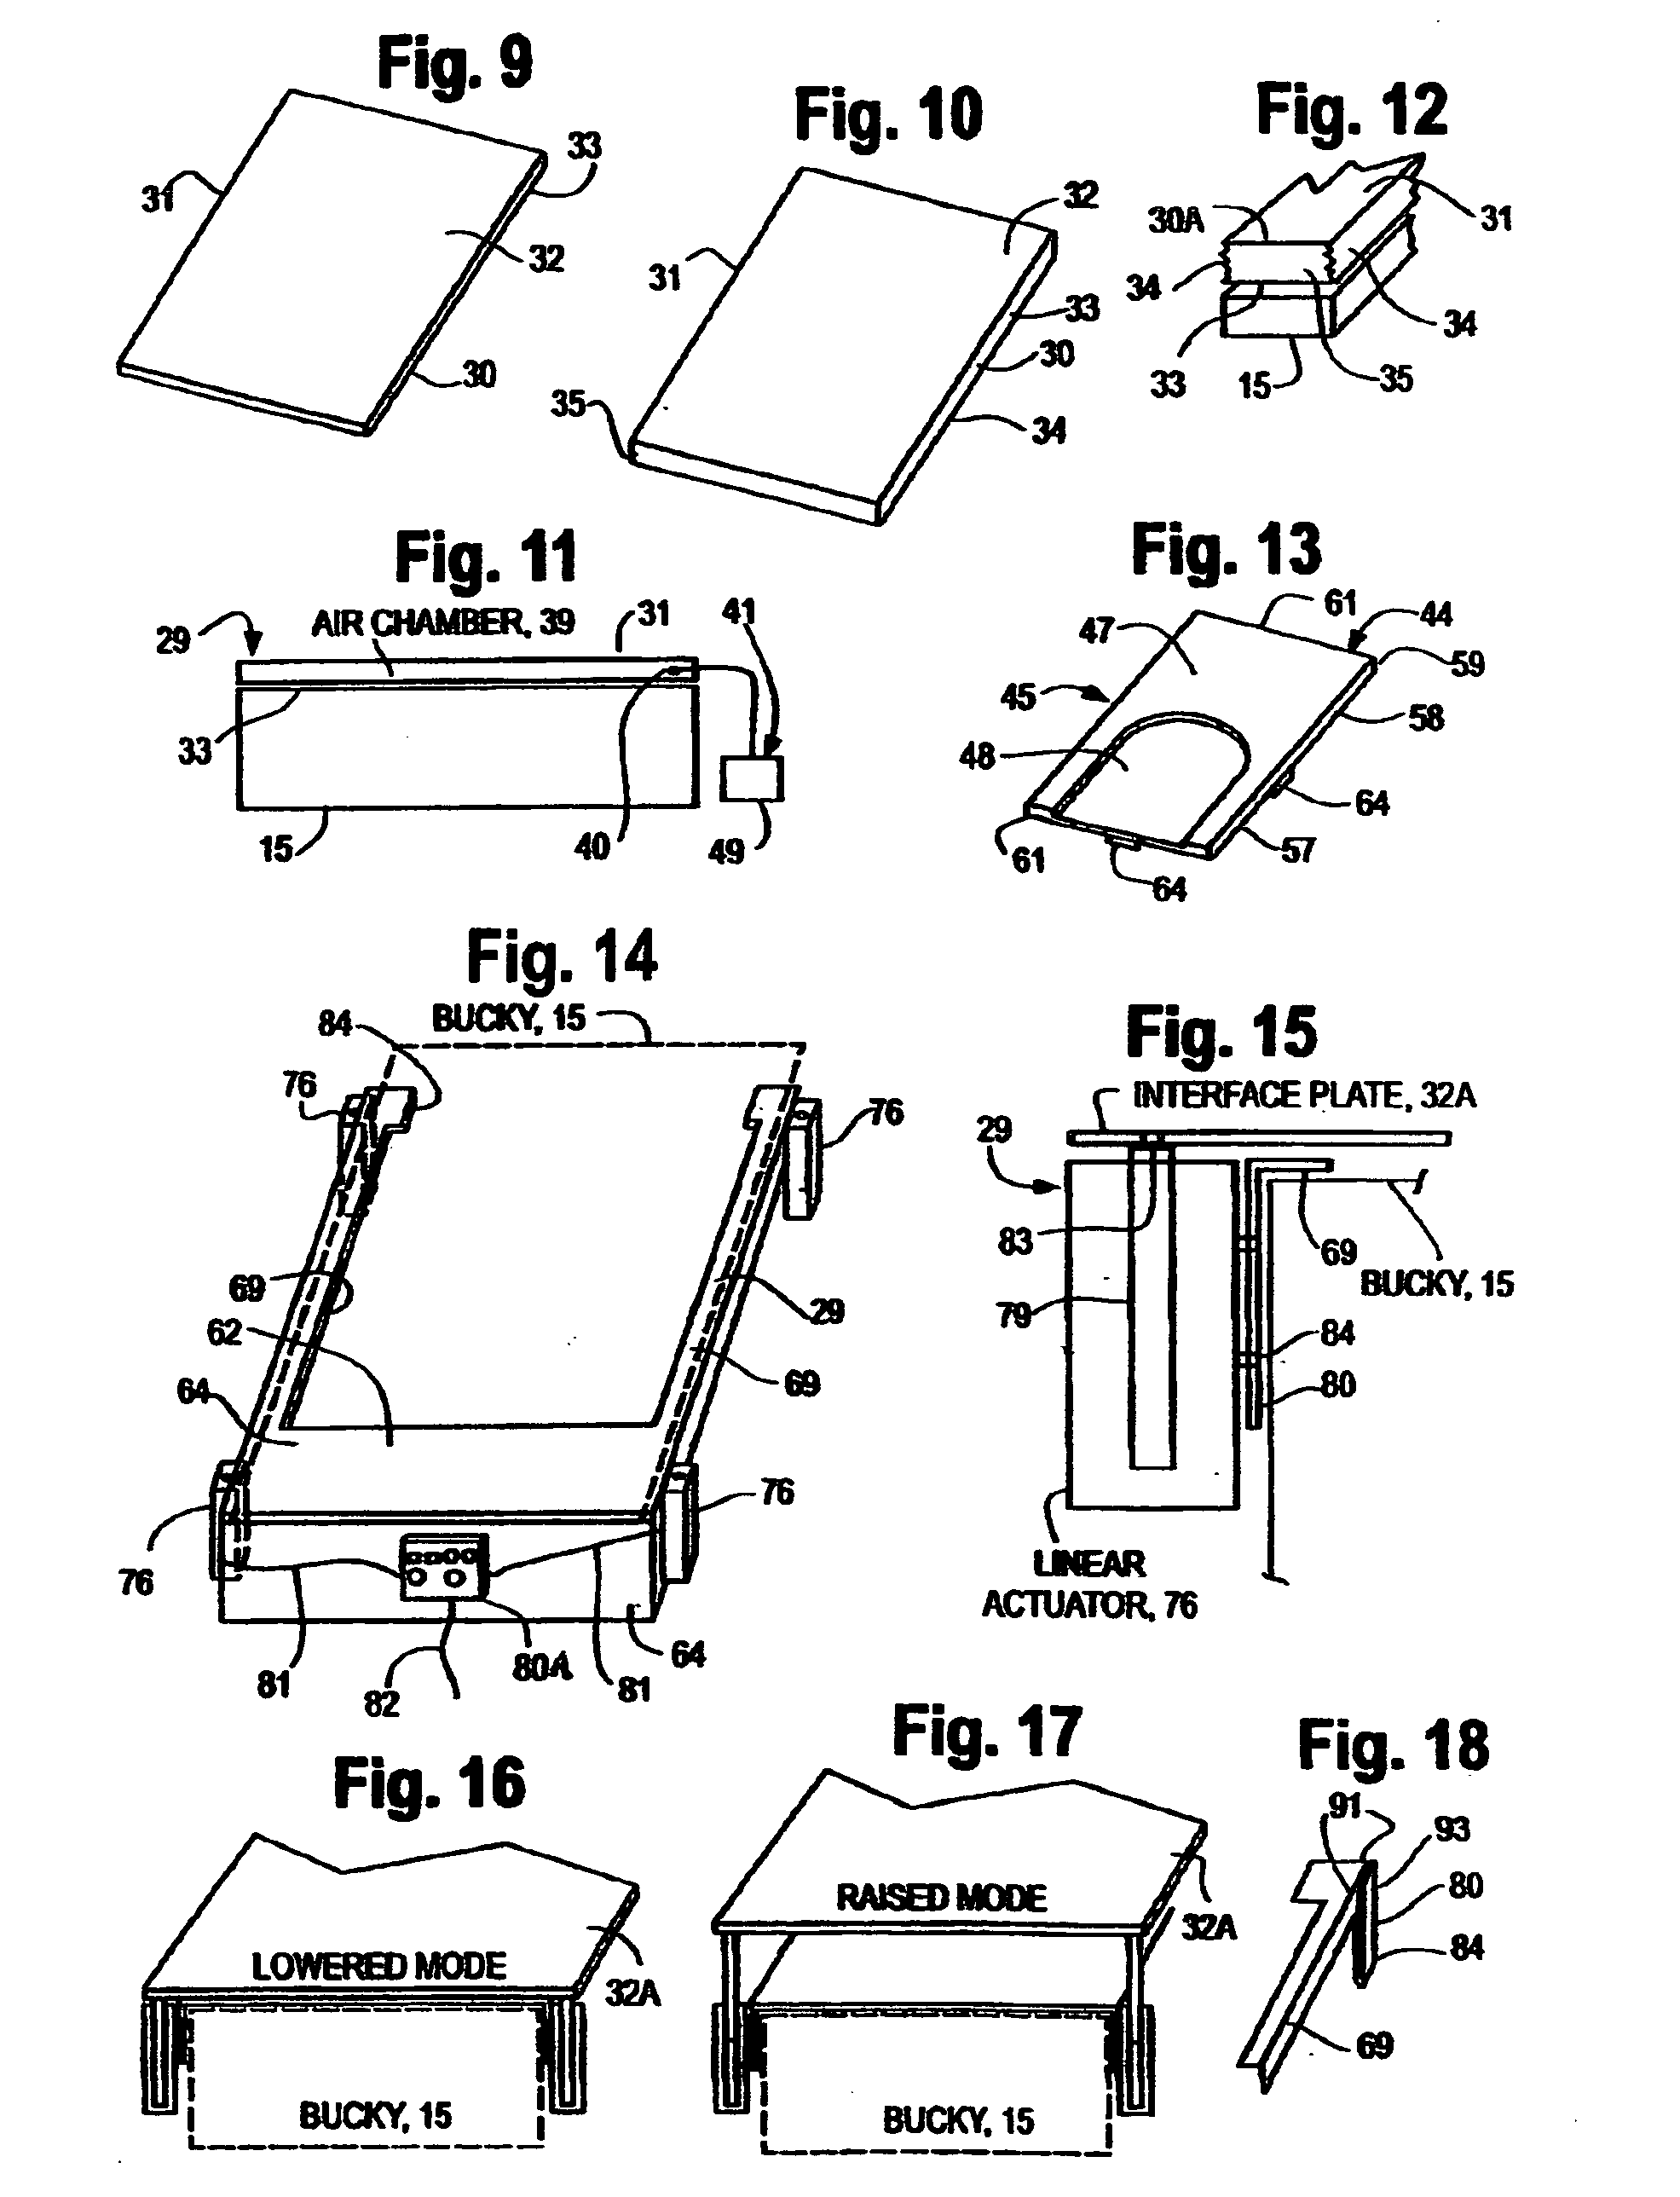 Mammography procedure and apparatus for reducing pain when compressing a breast